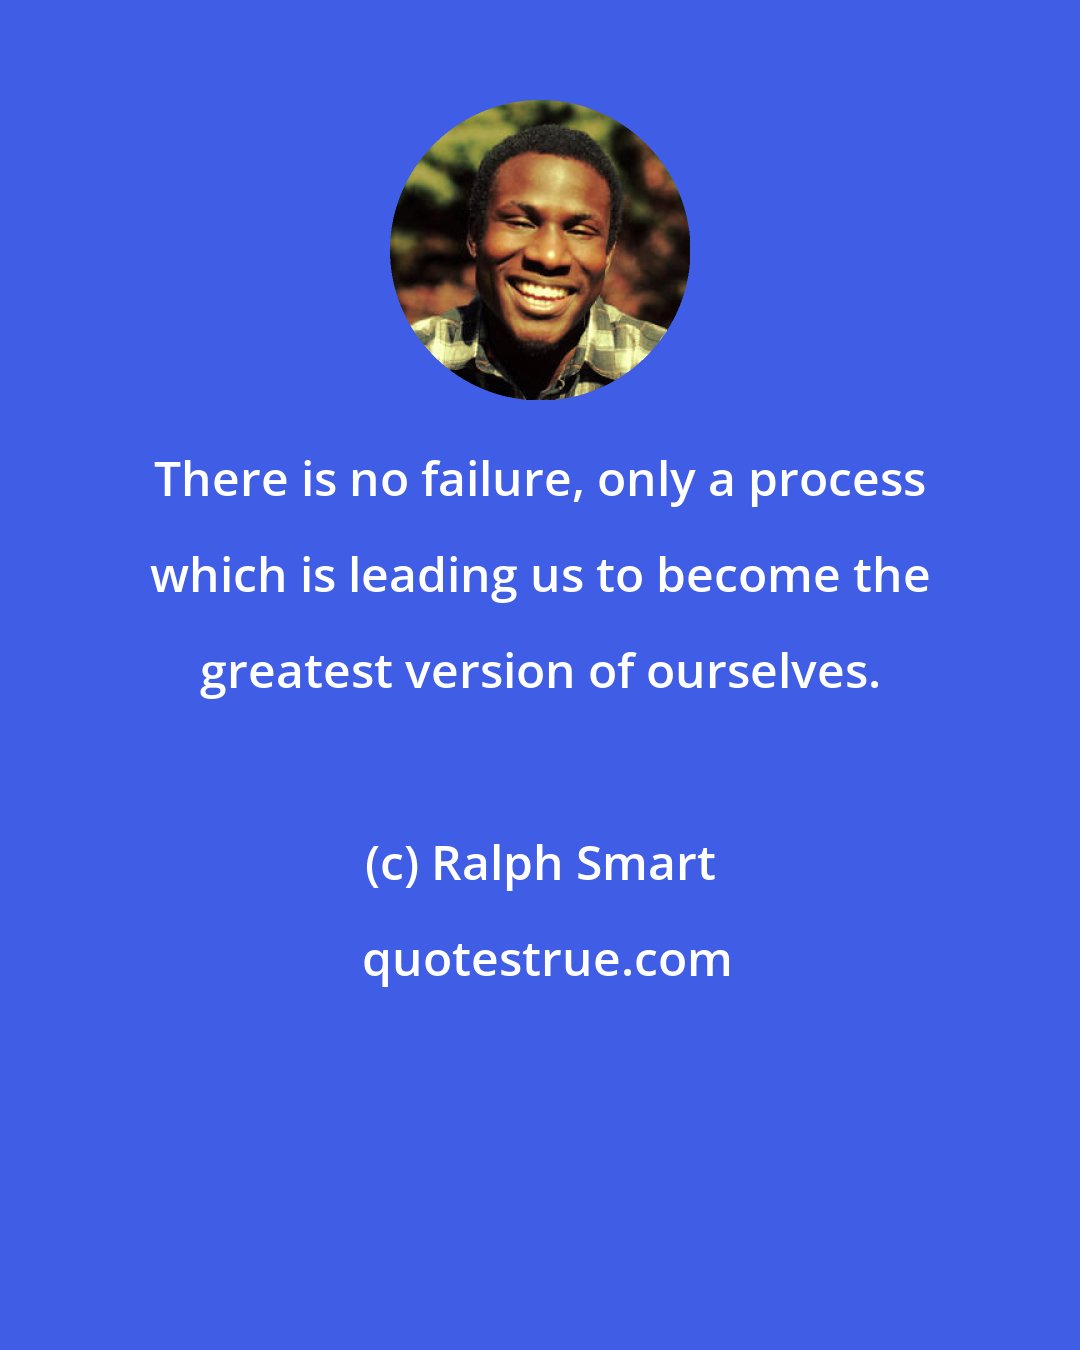 Ralph Smart: There is no failure, only a process which is leading us to become the greatest version of ourselves.